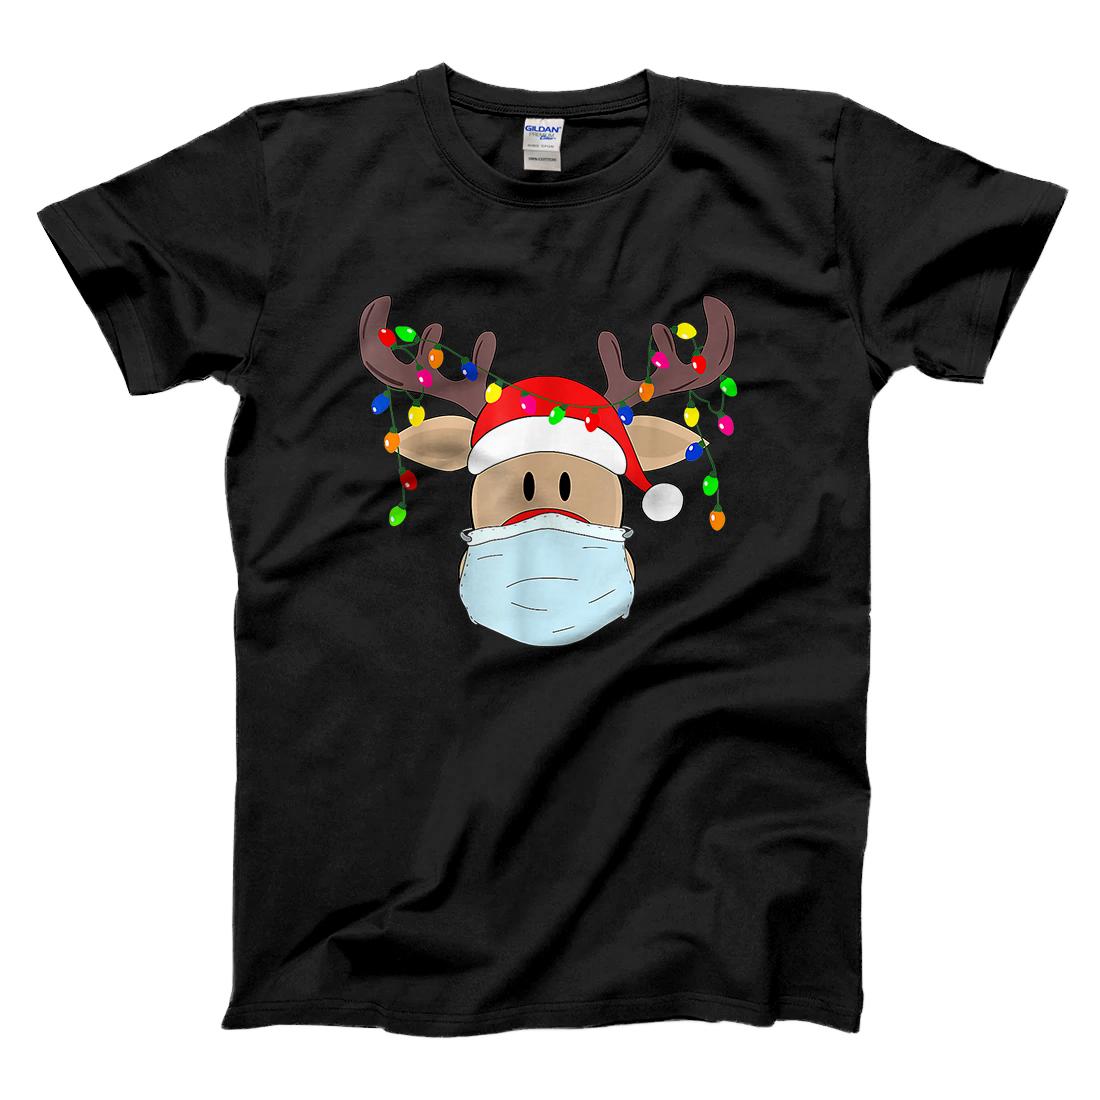 Personalized Christmas mask cute Rudolph reindeer mask shirt for holidays T-Shirt